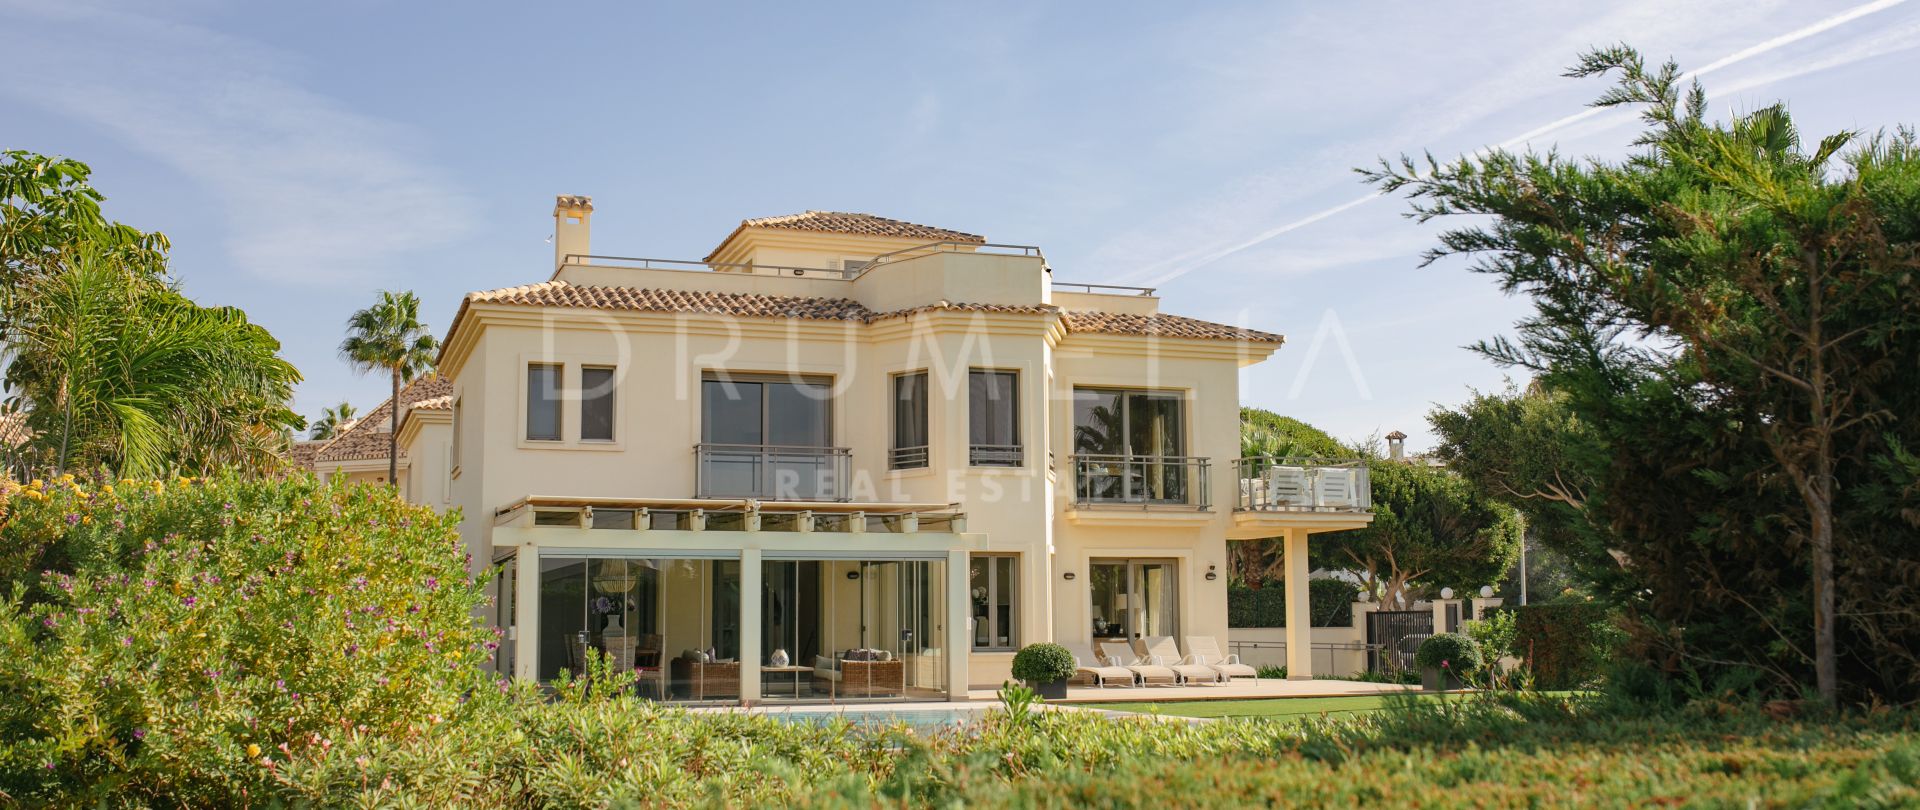 Magnificent front-line beach classy luxury villa with fantastic open sea views in Marbella East